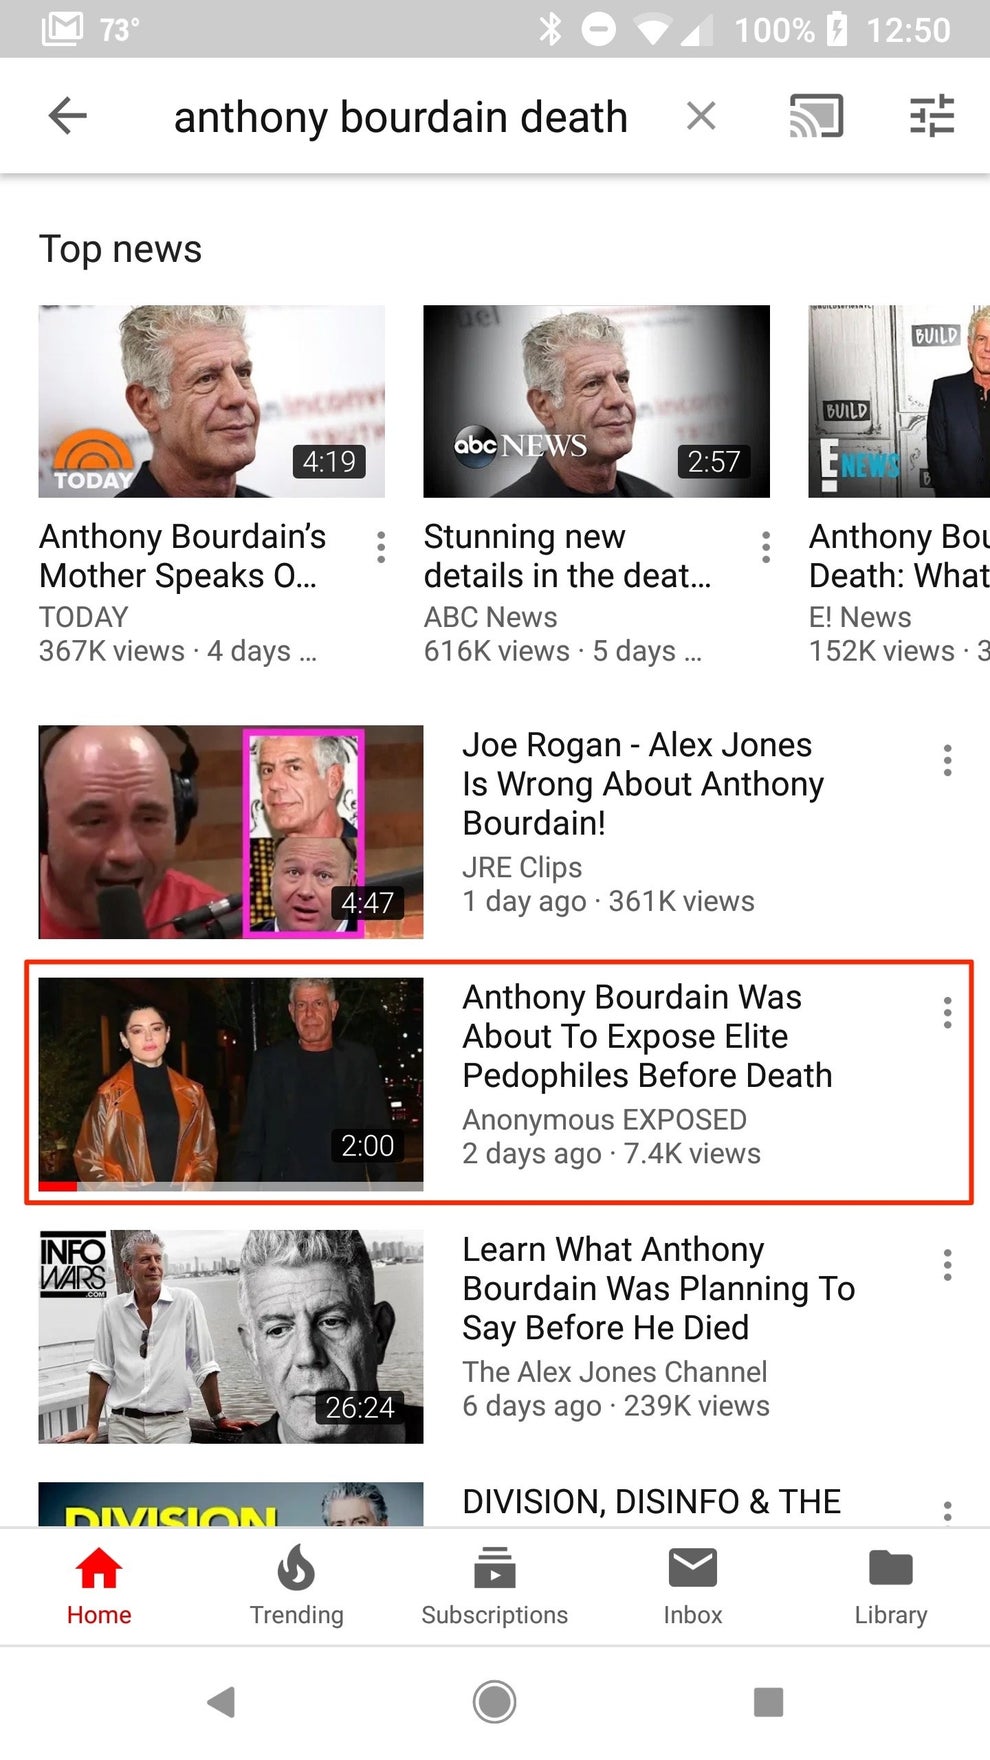 YouTube Is Spreading Conspiracy Theories about Anthony Bourdain's Death